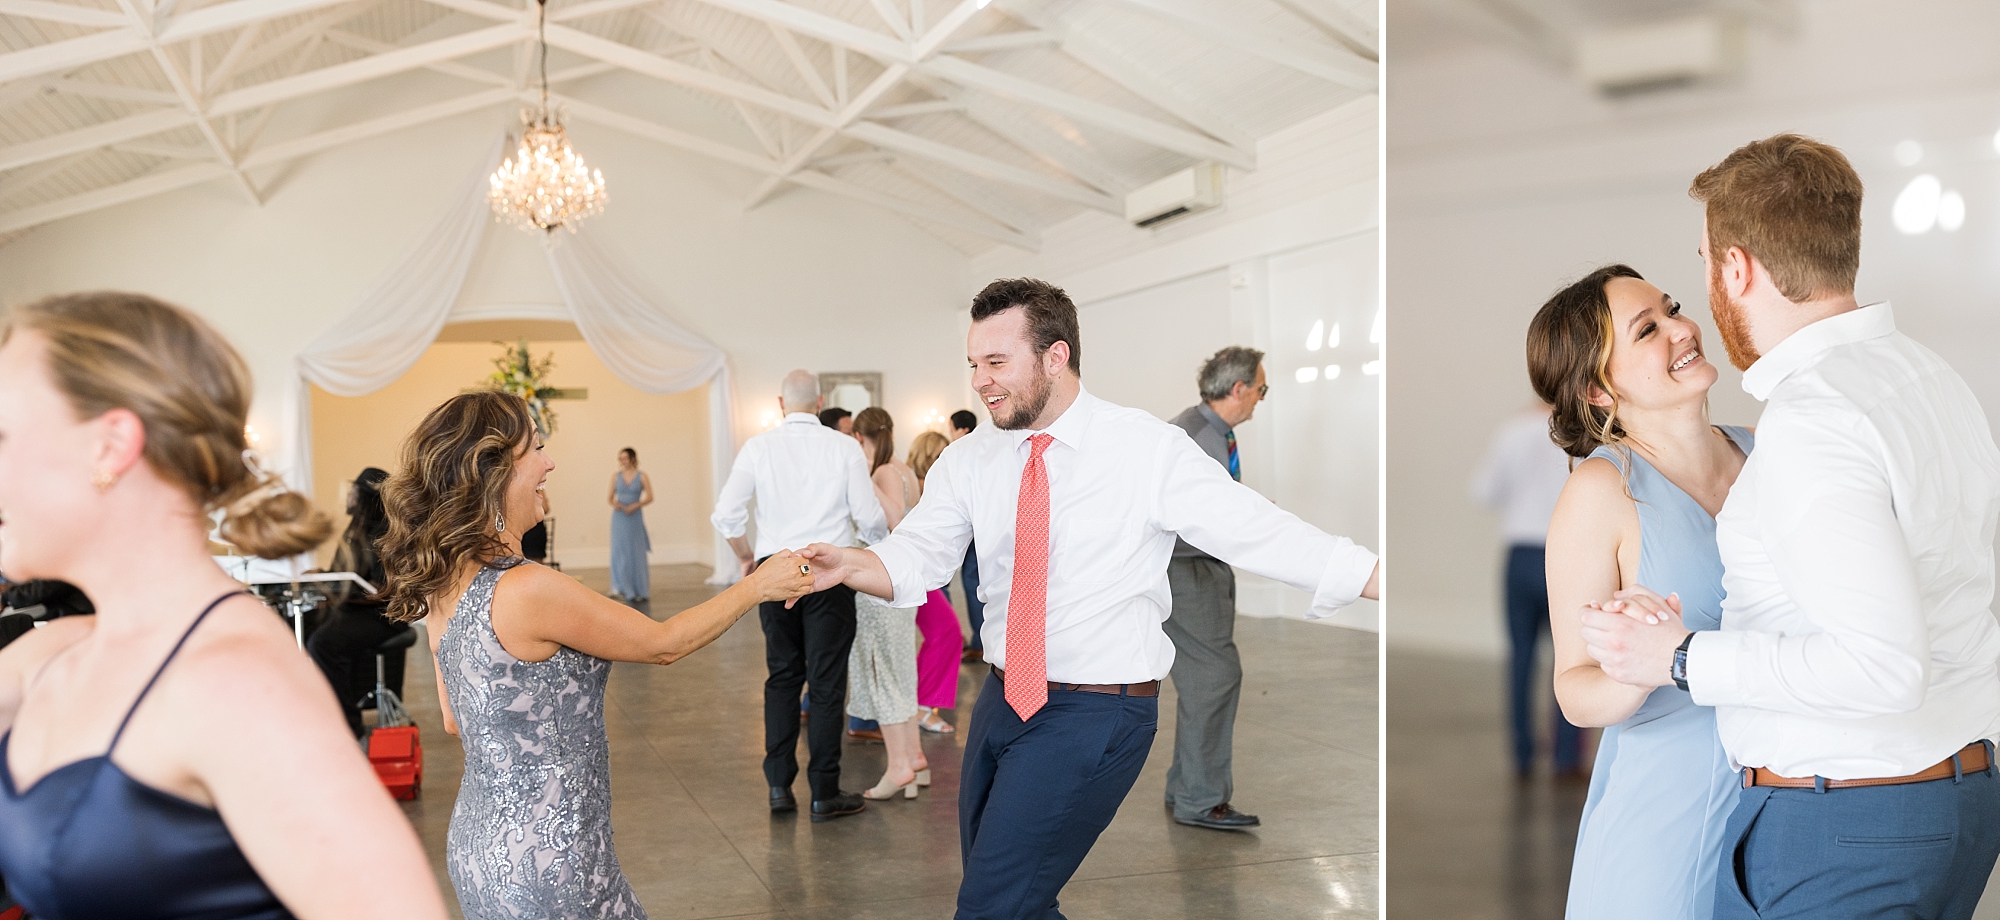 guests dancing at wedding reception | Raleigh NC Wedding Photographer